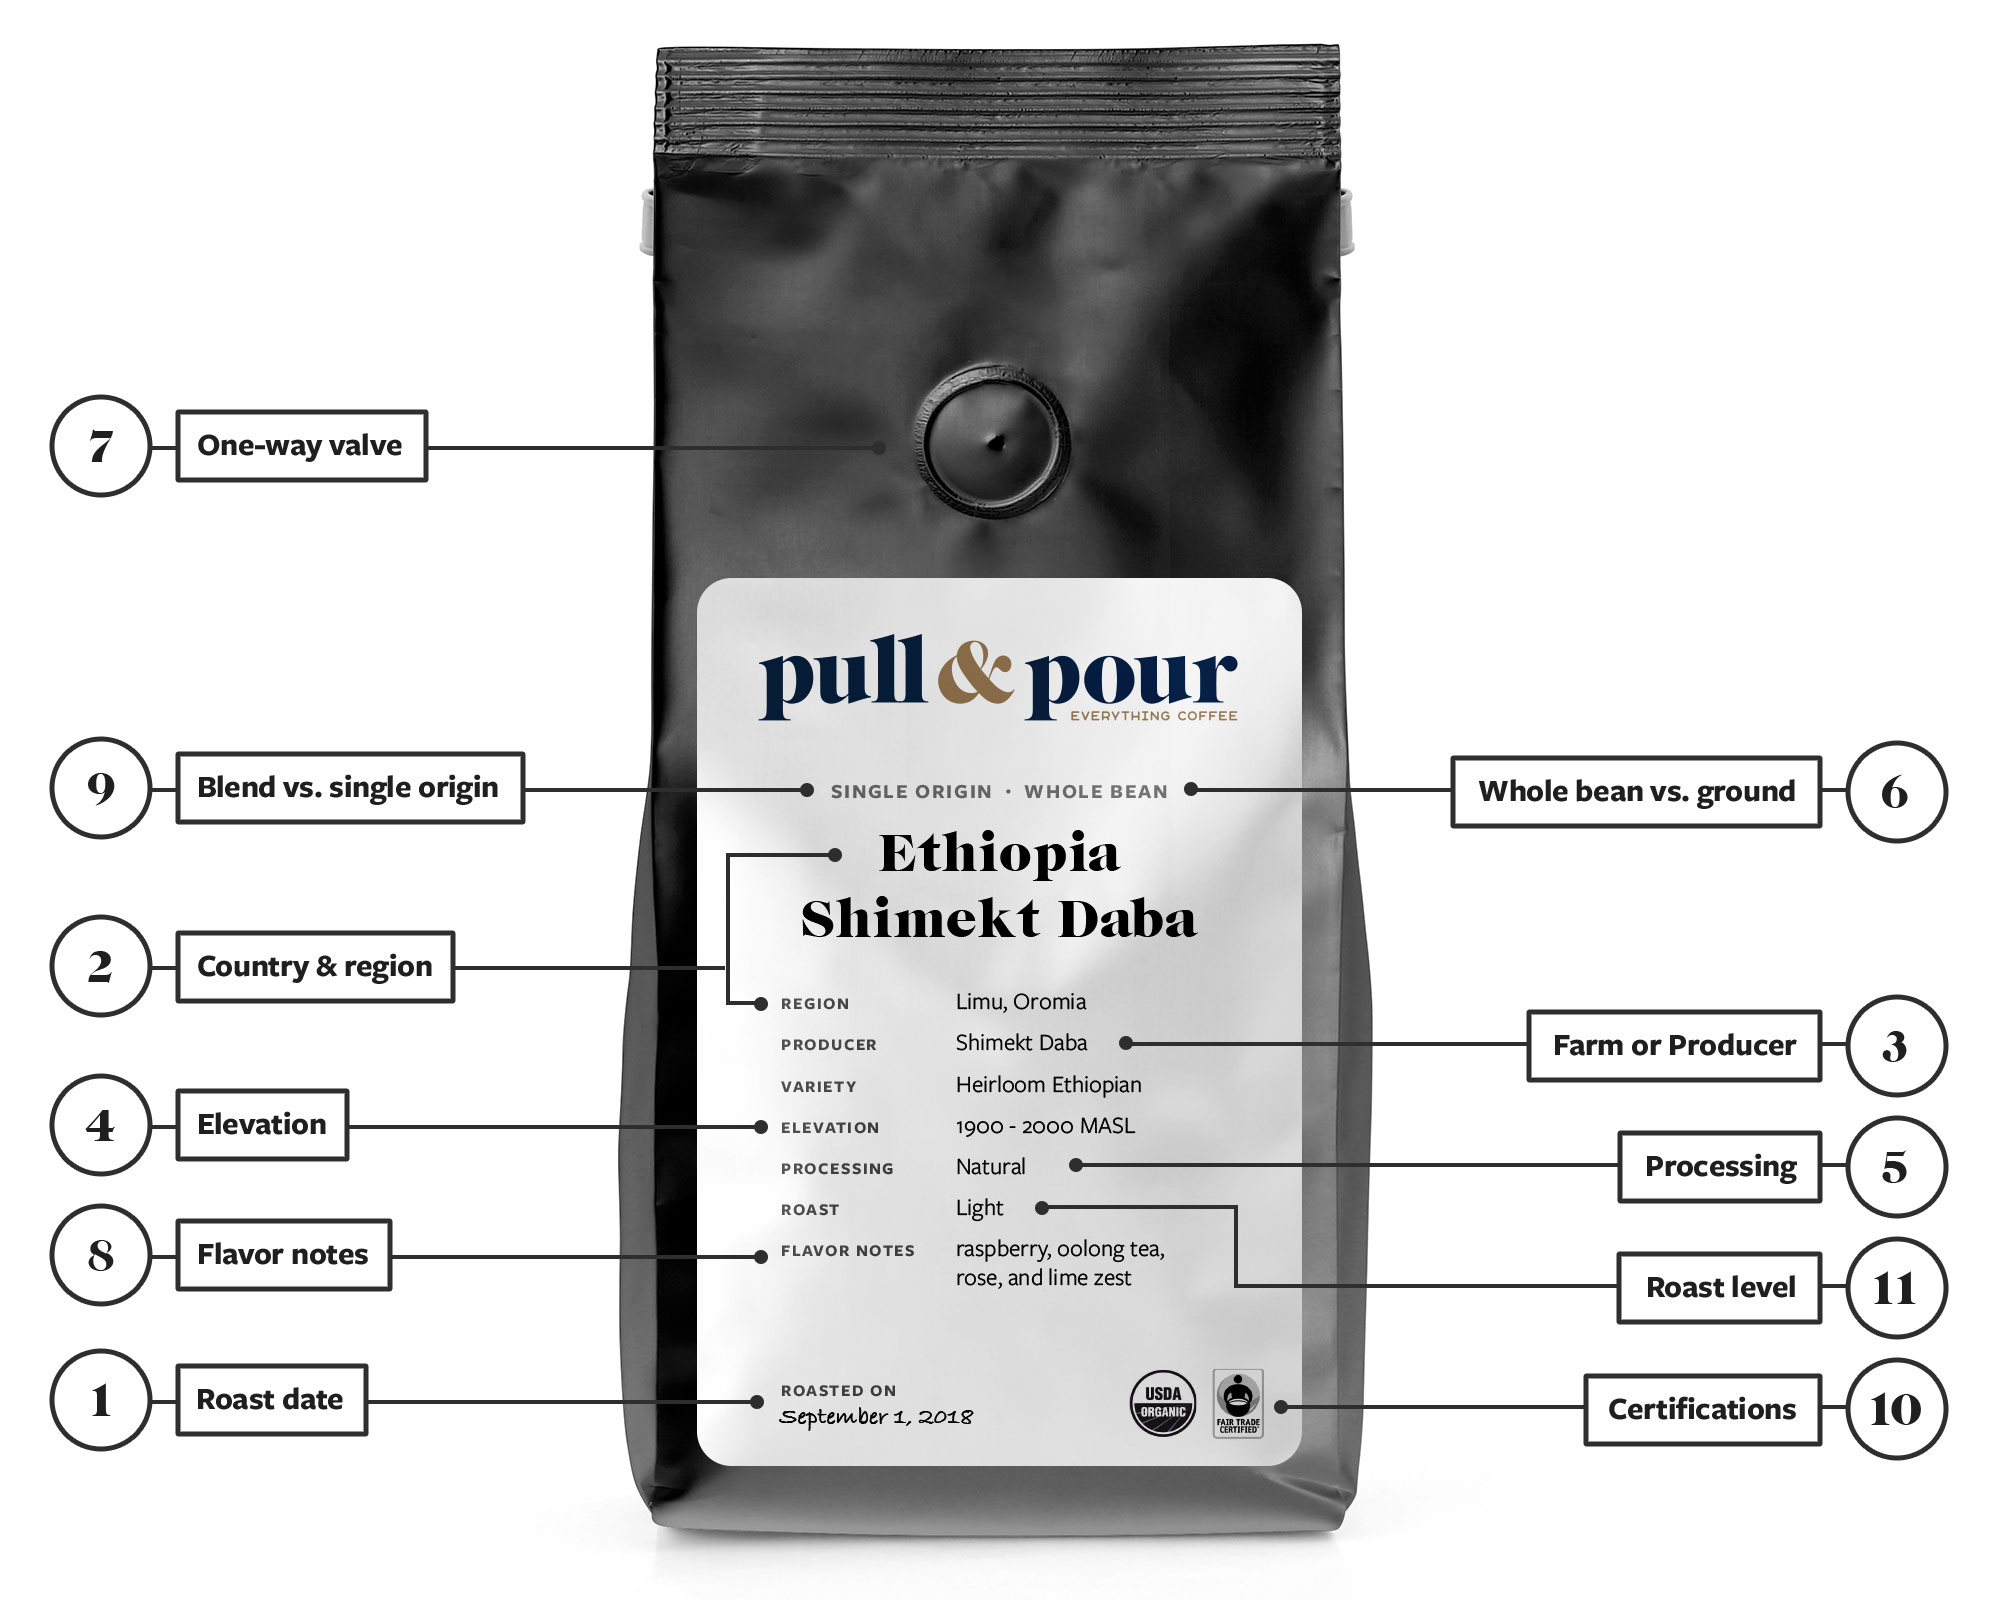 Download How to Buy the Best Coffee Based on the Bag and Packaging - Pull & Pour